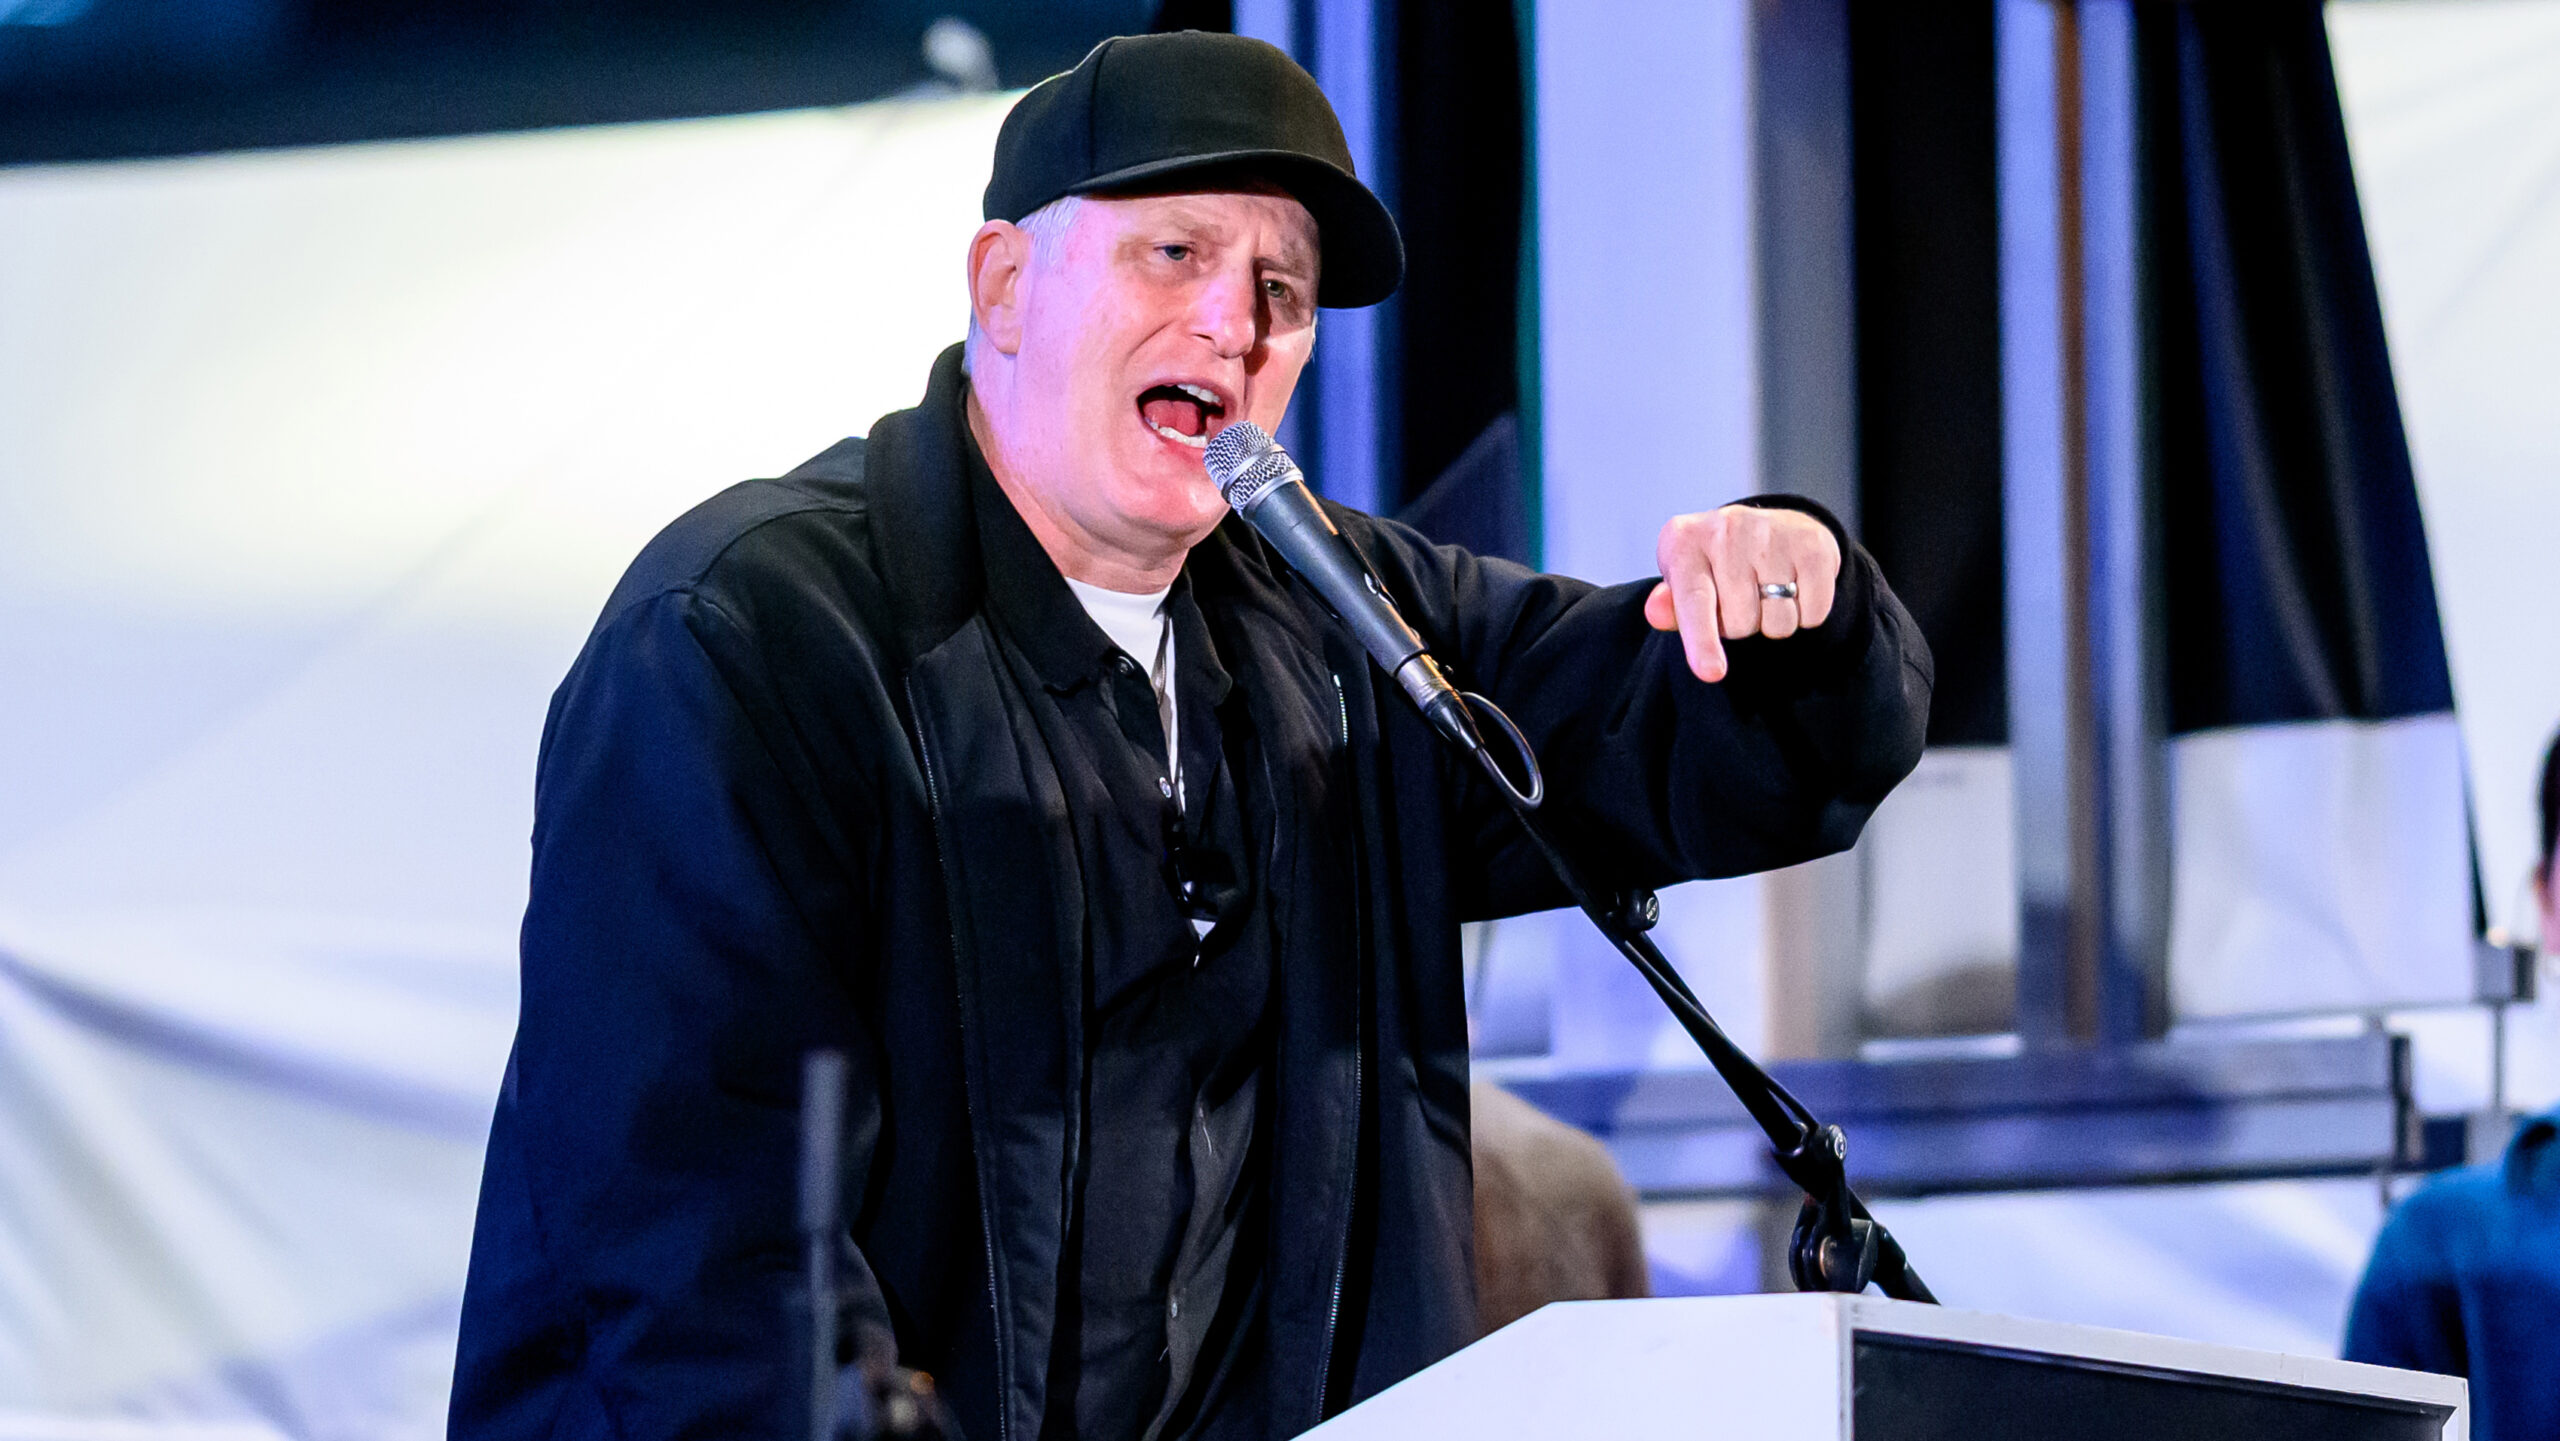 Michael Rapaport’s Comedy Show Axed Due to Pro-Hamas Protests: ‘Unfortunate